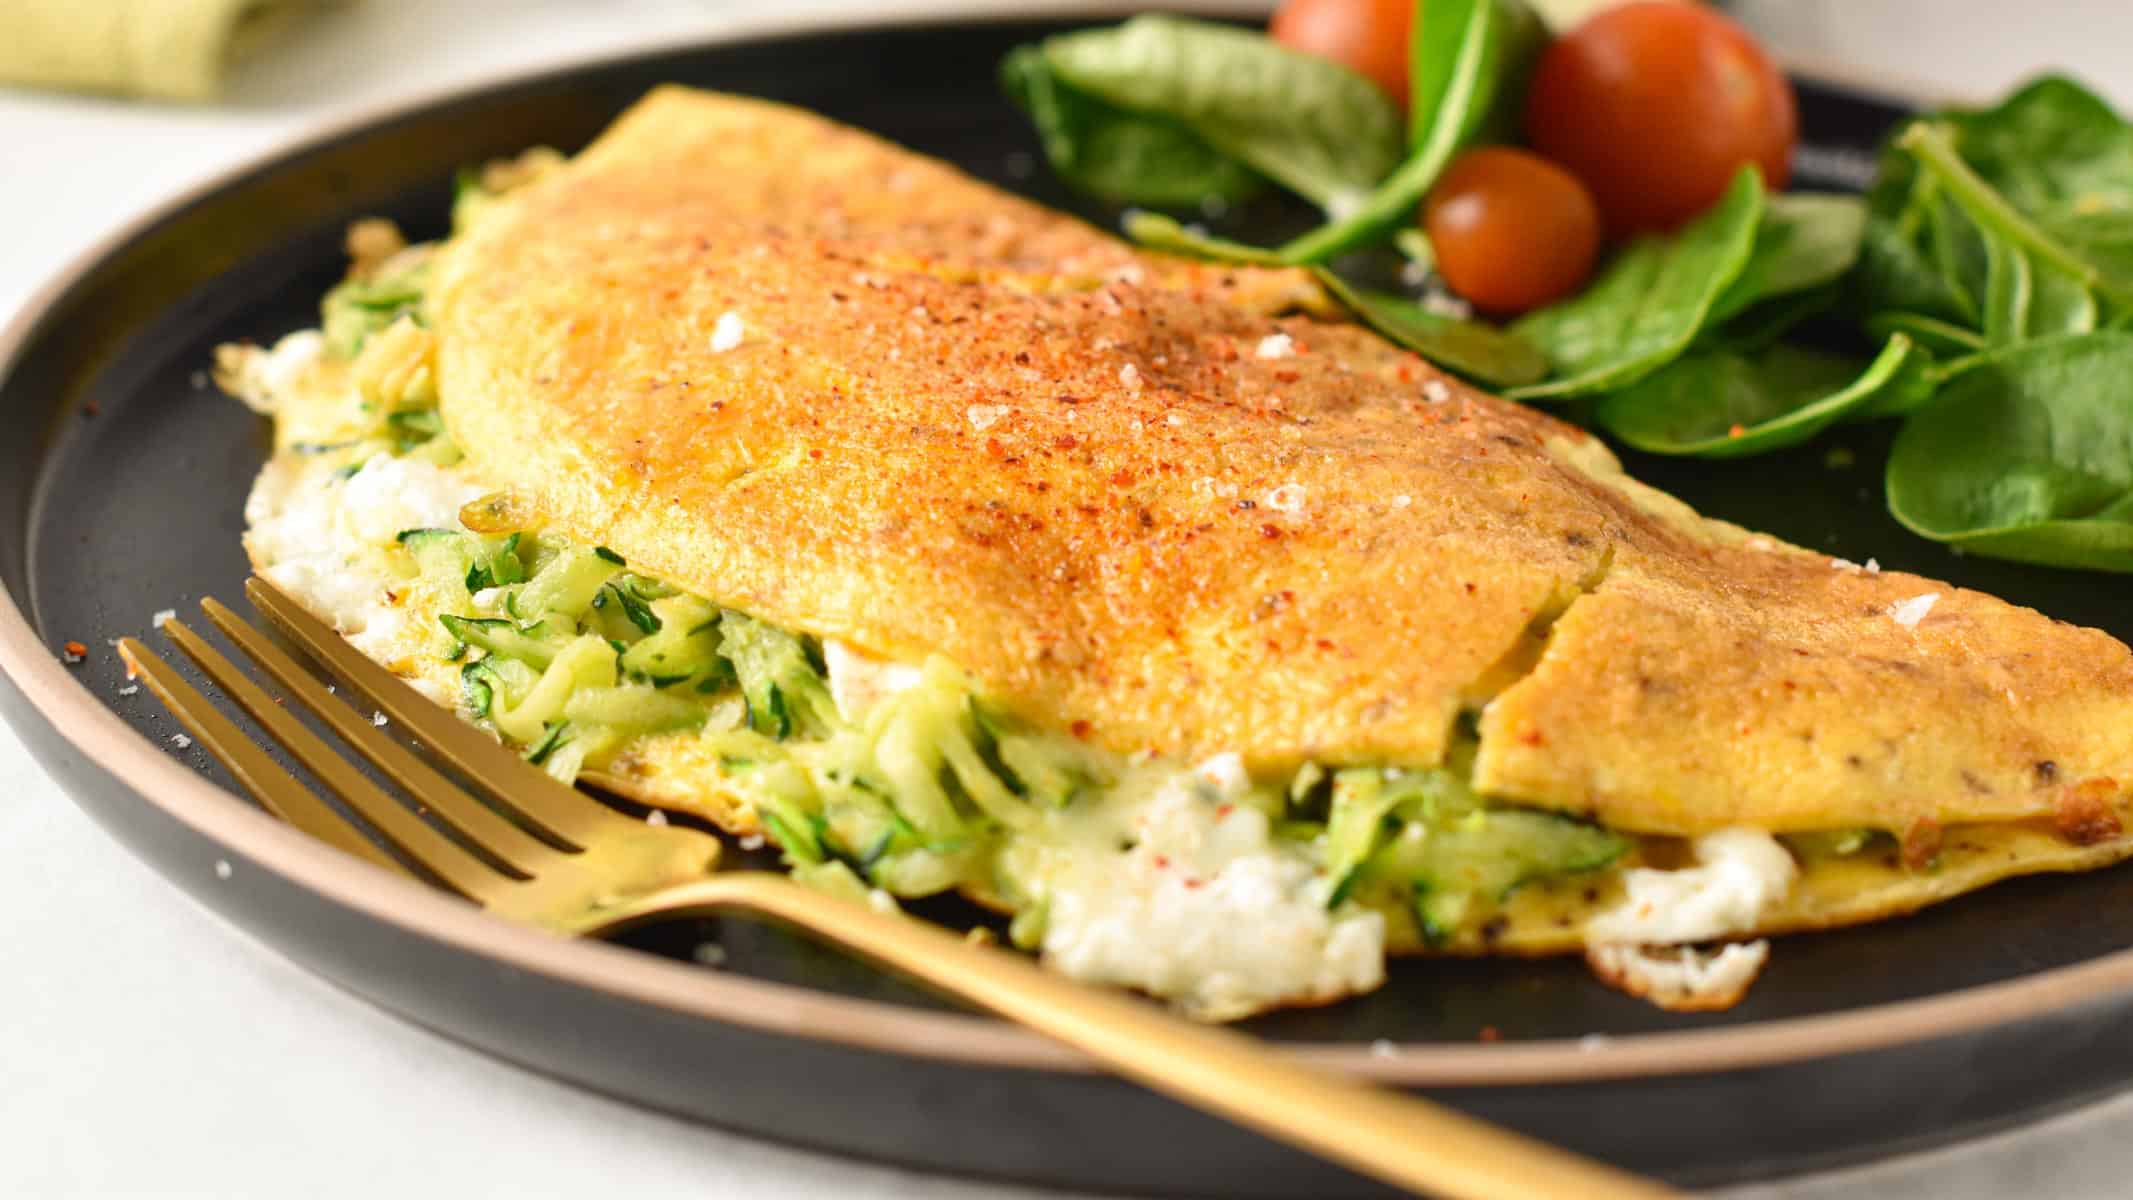 A zucchini omelette filled with feta and Parmesan on a black plate decorated with baby spinach and tomatoes.